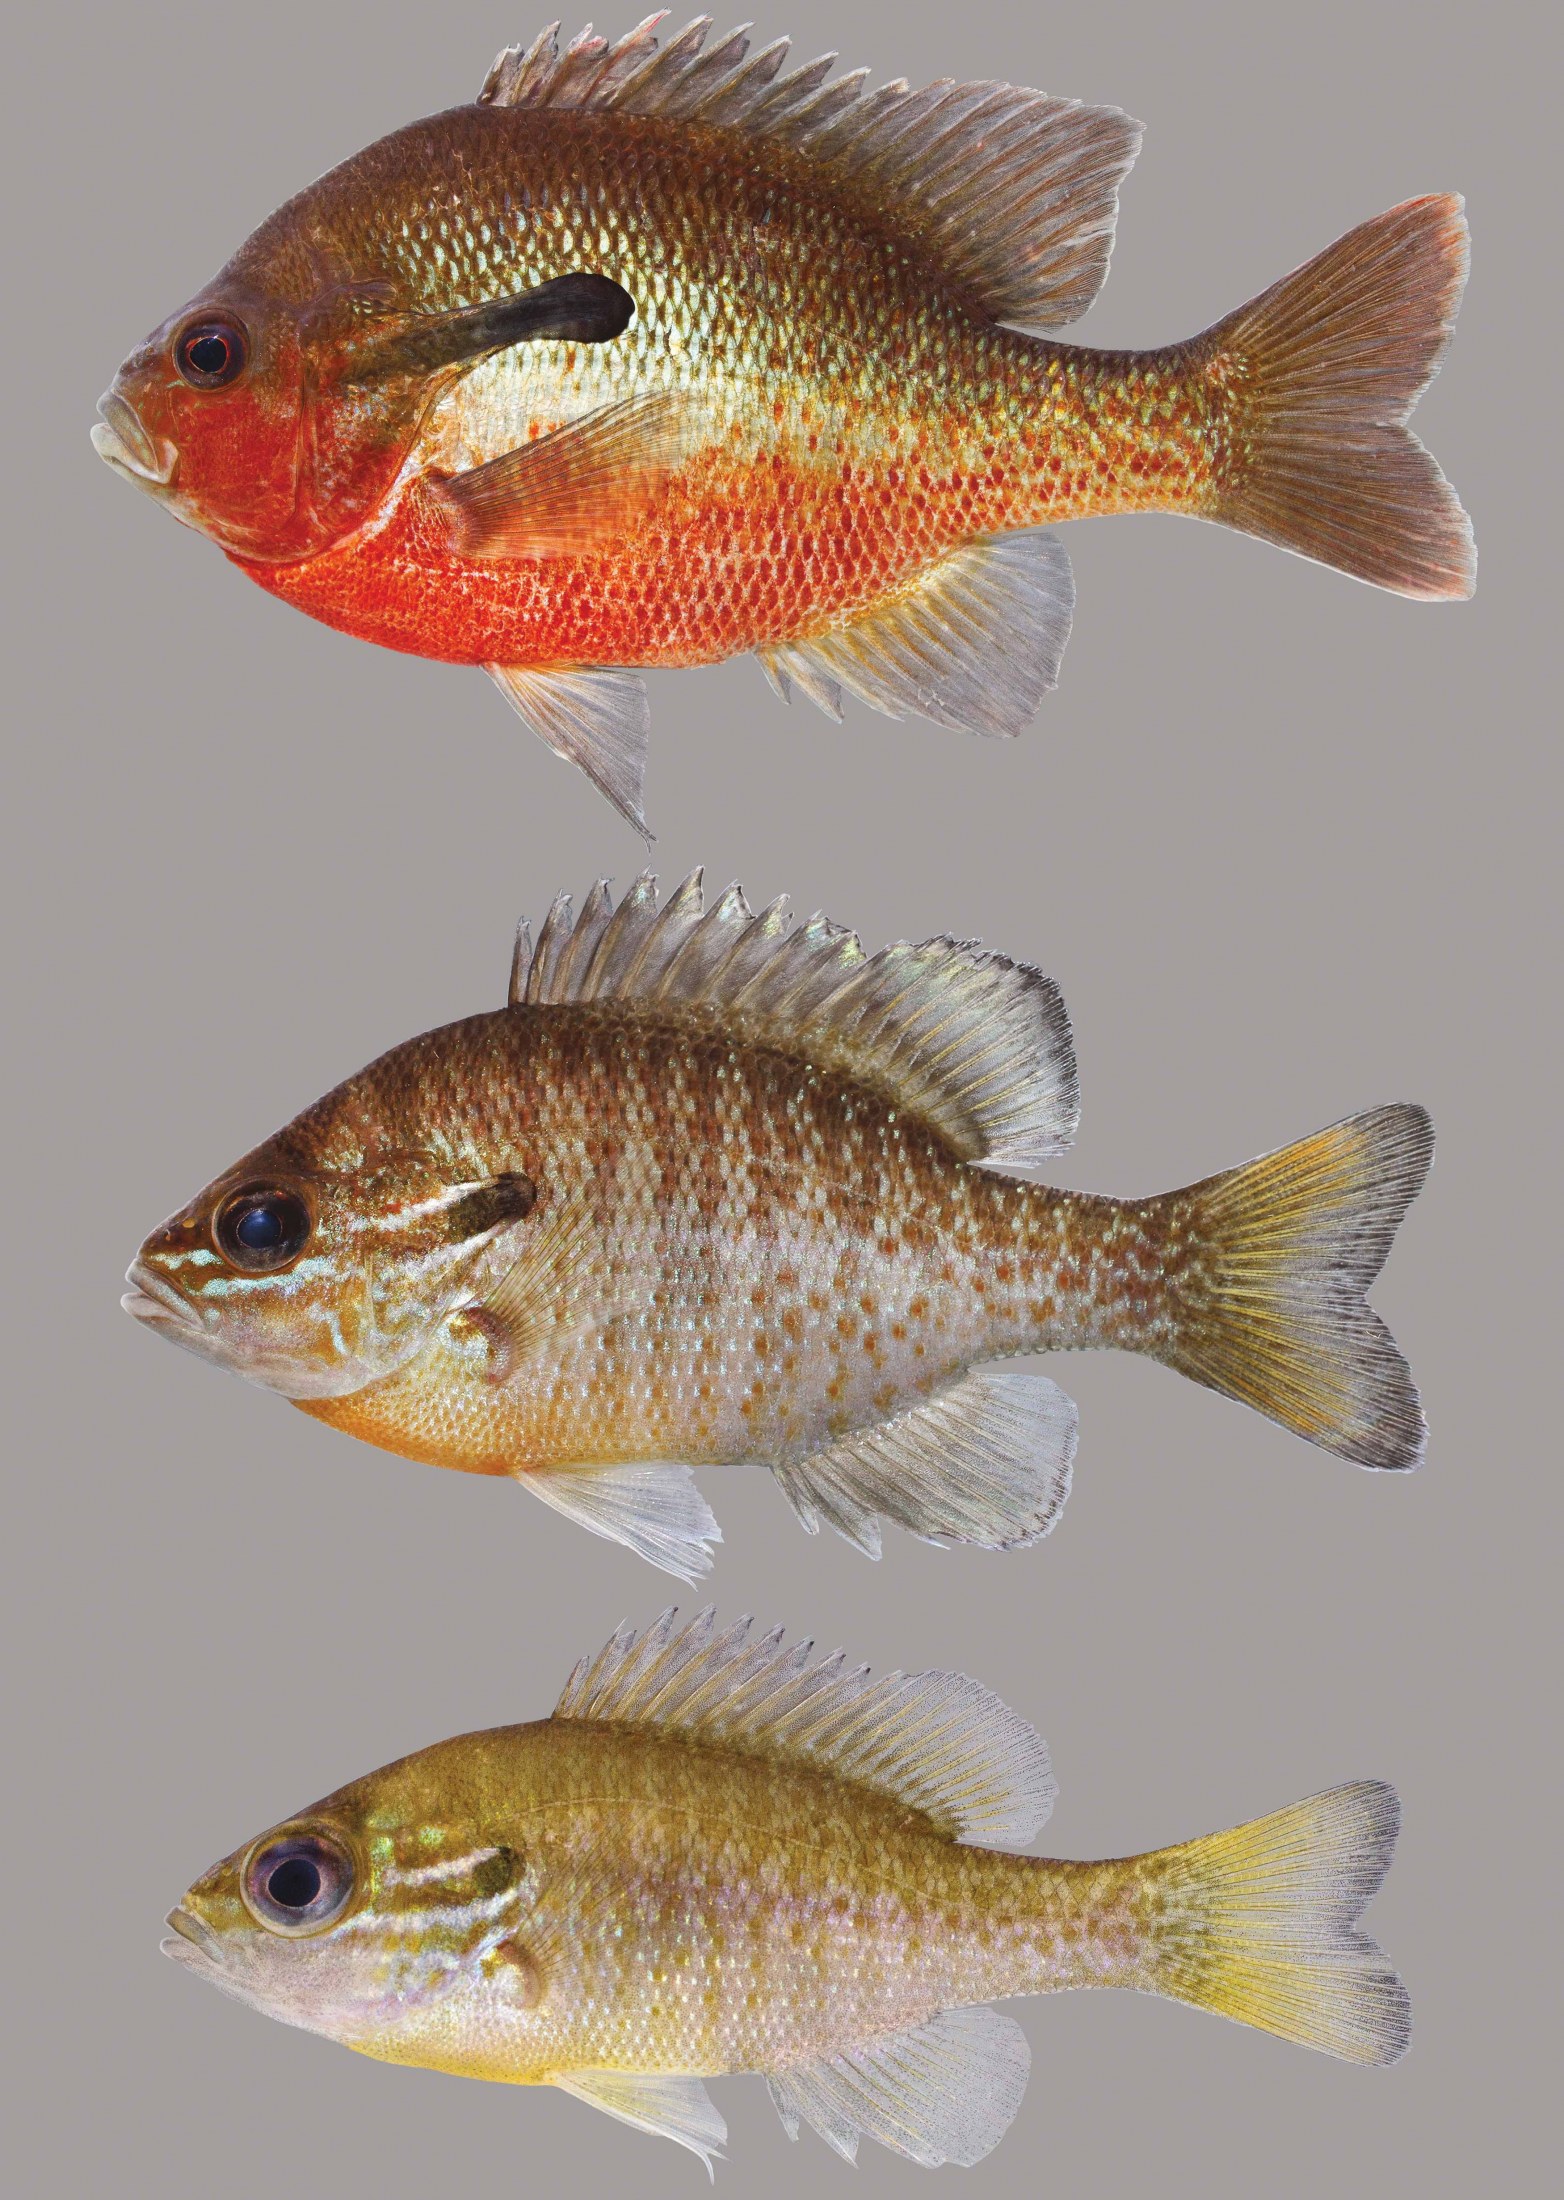 Redbreast Sunfish – Discover Fishes